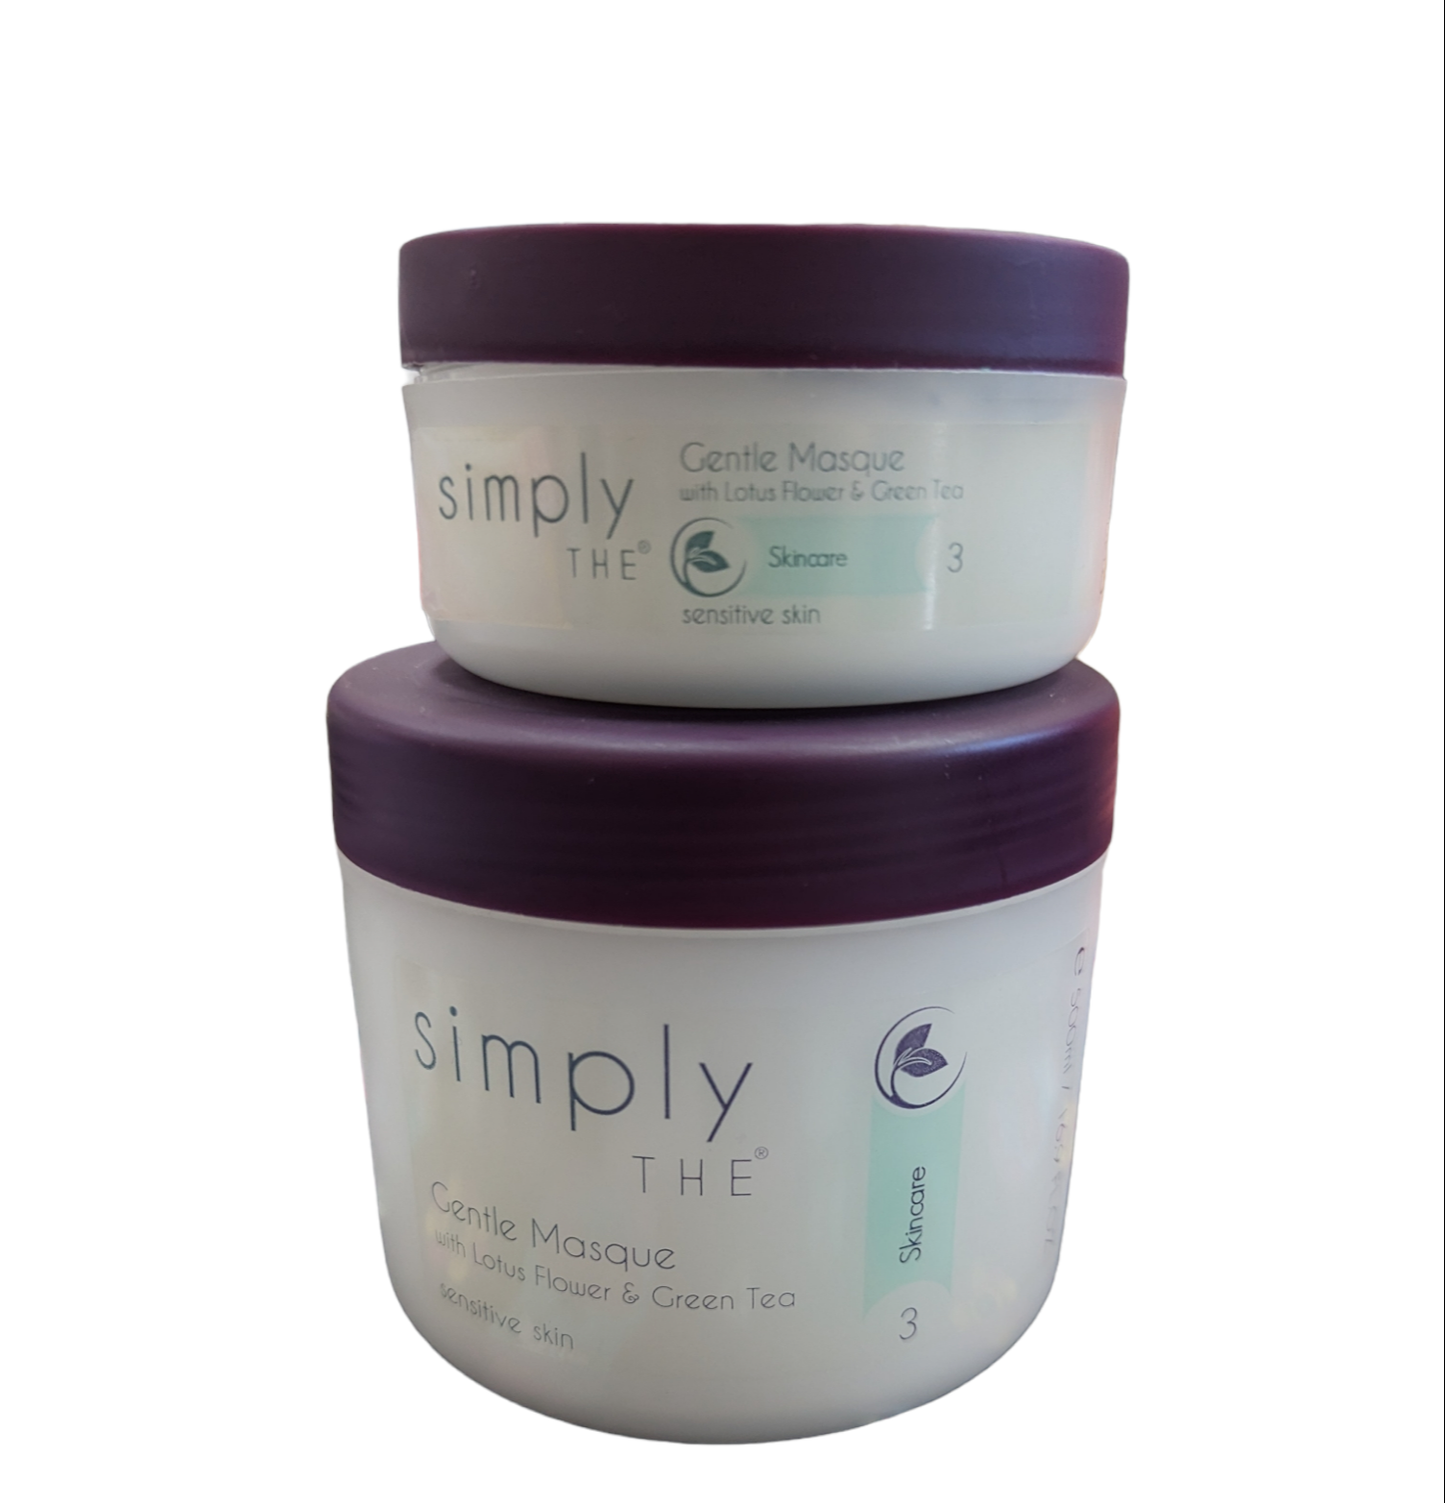 Simply The Gentle Masque